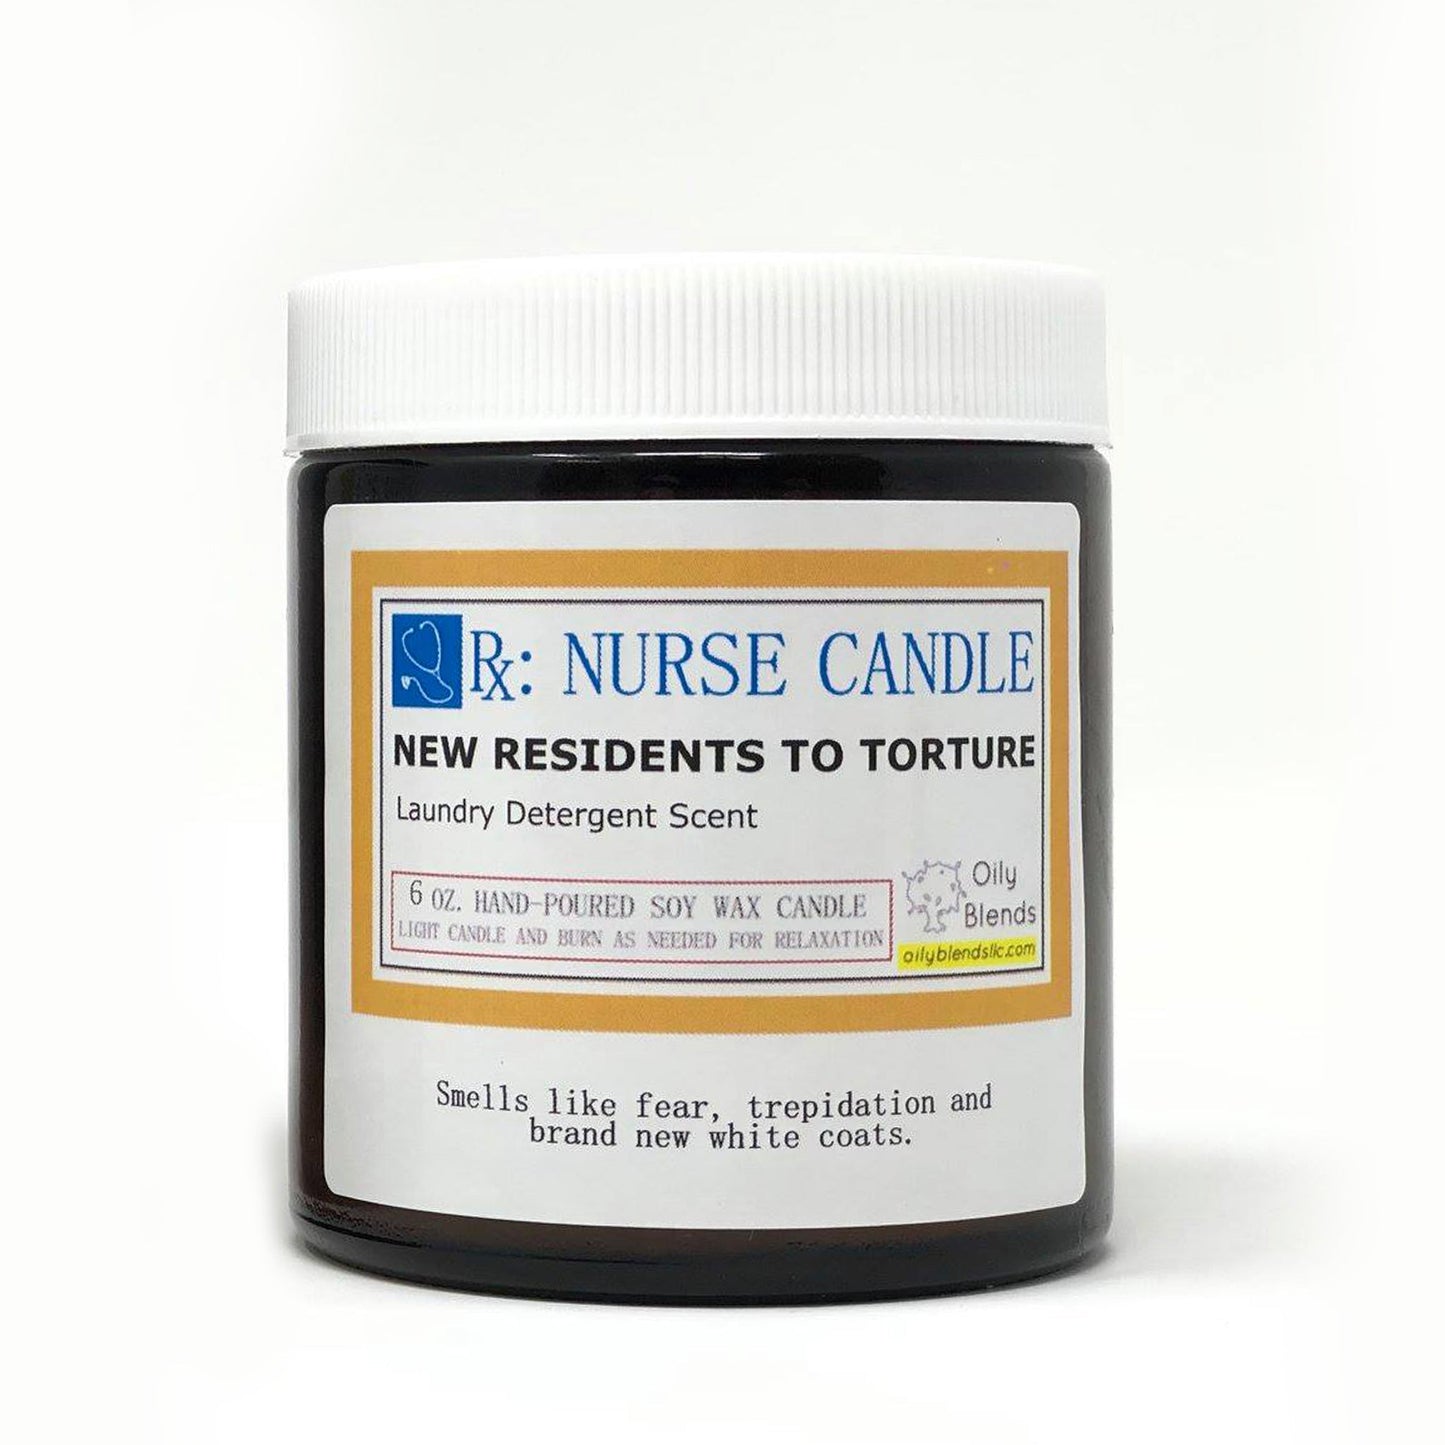 Nurse Candles - 25 Hour Burn Time Soy Wax Candles